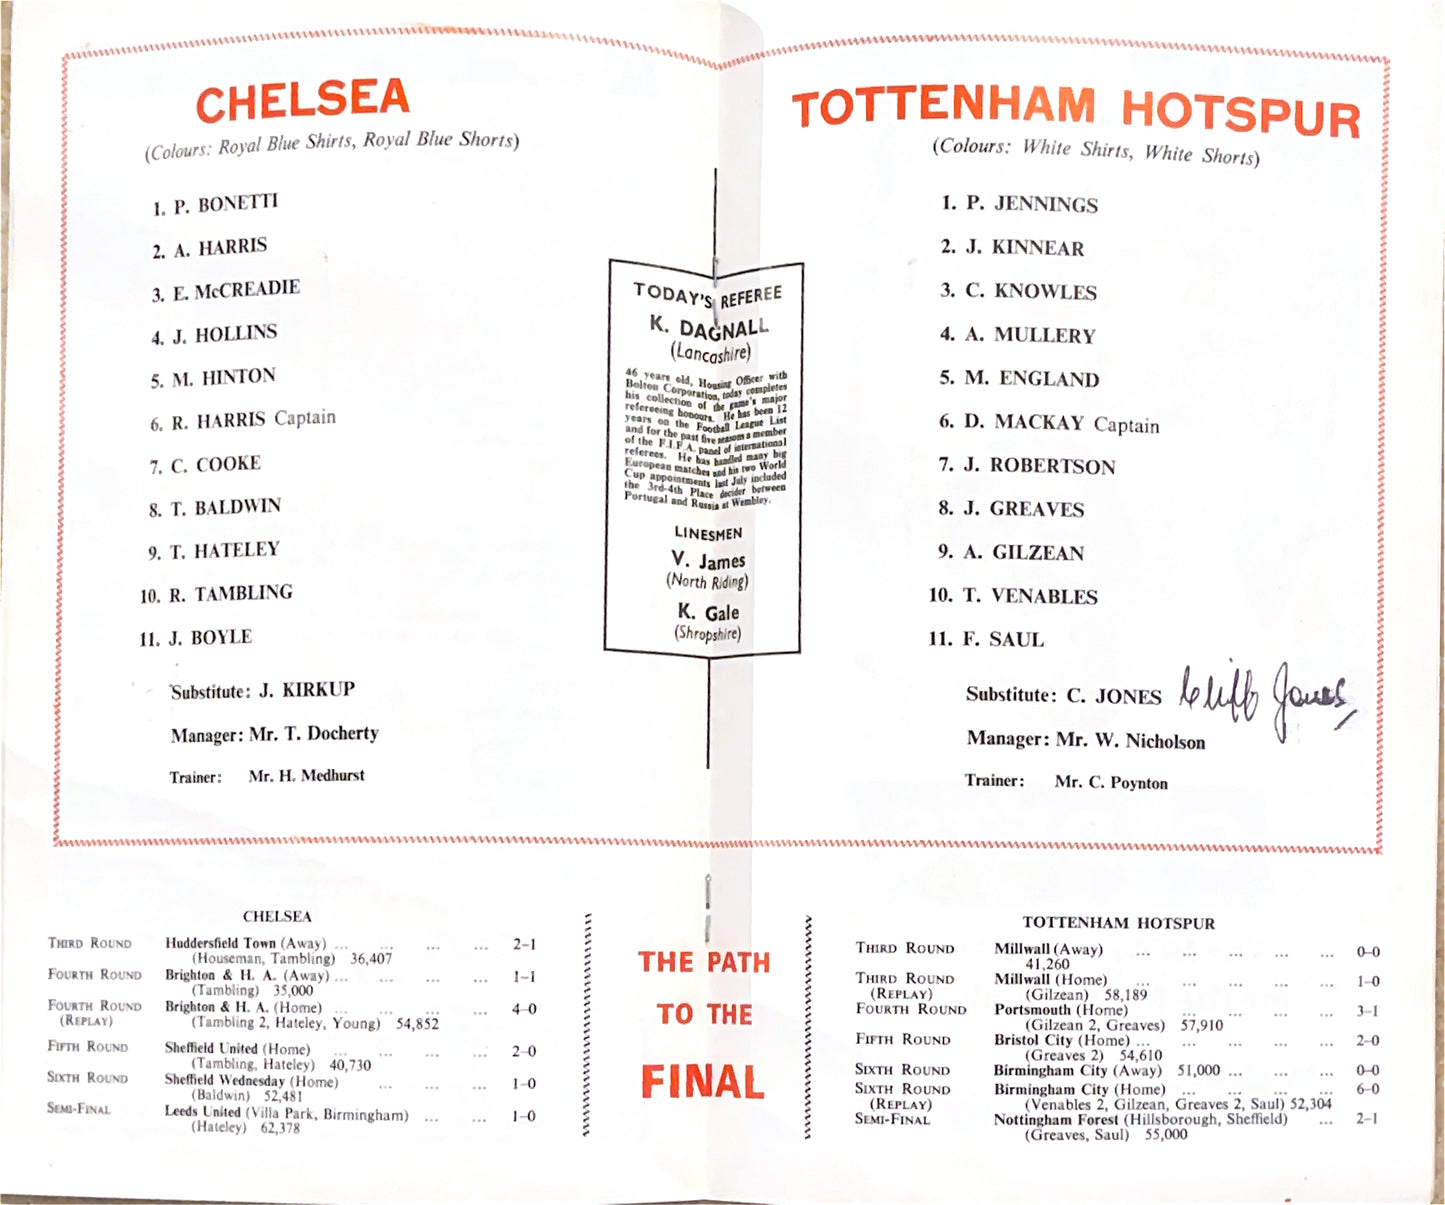 Chelsea V Tottenham FA Cup Final 1967 Official Programme Signed By Cliff Jones